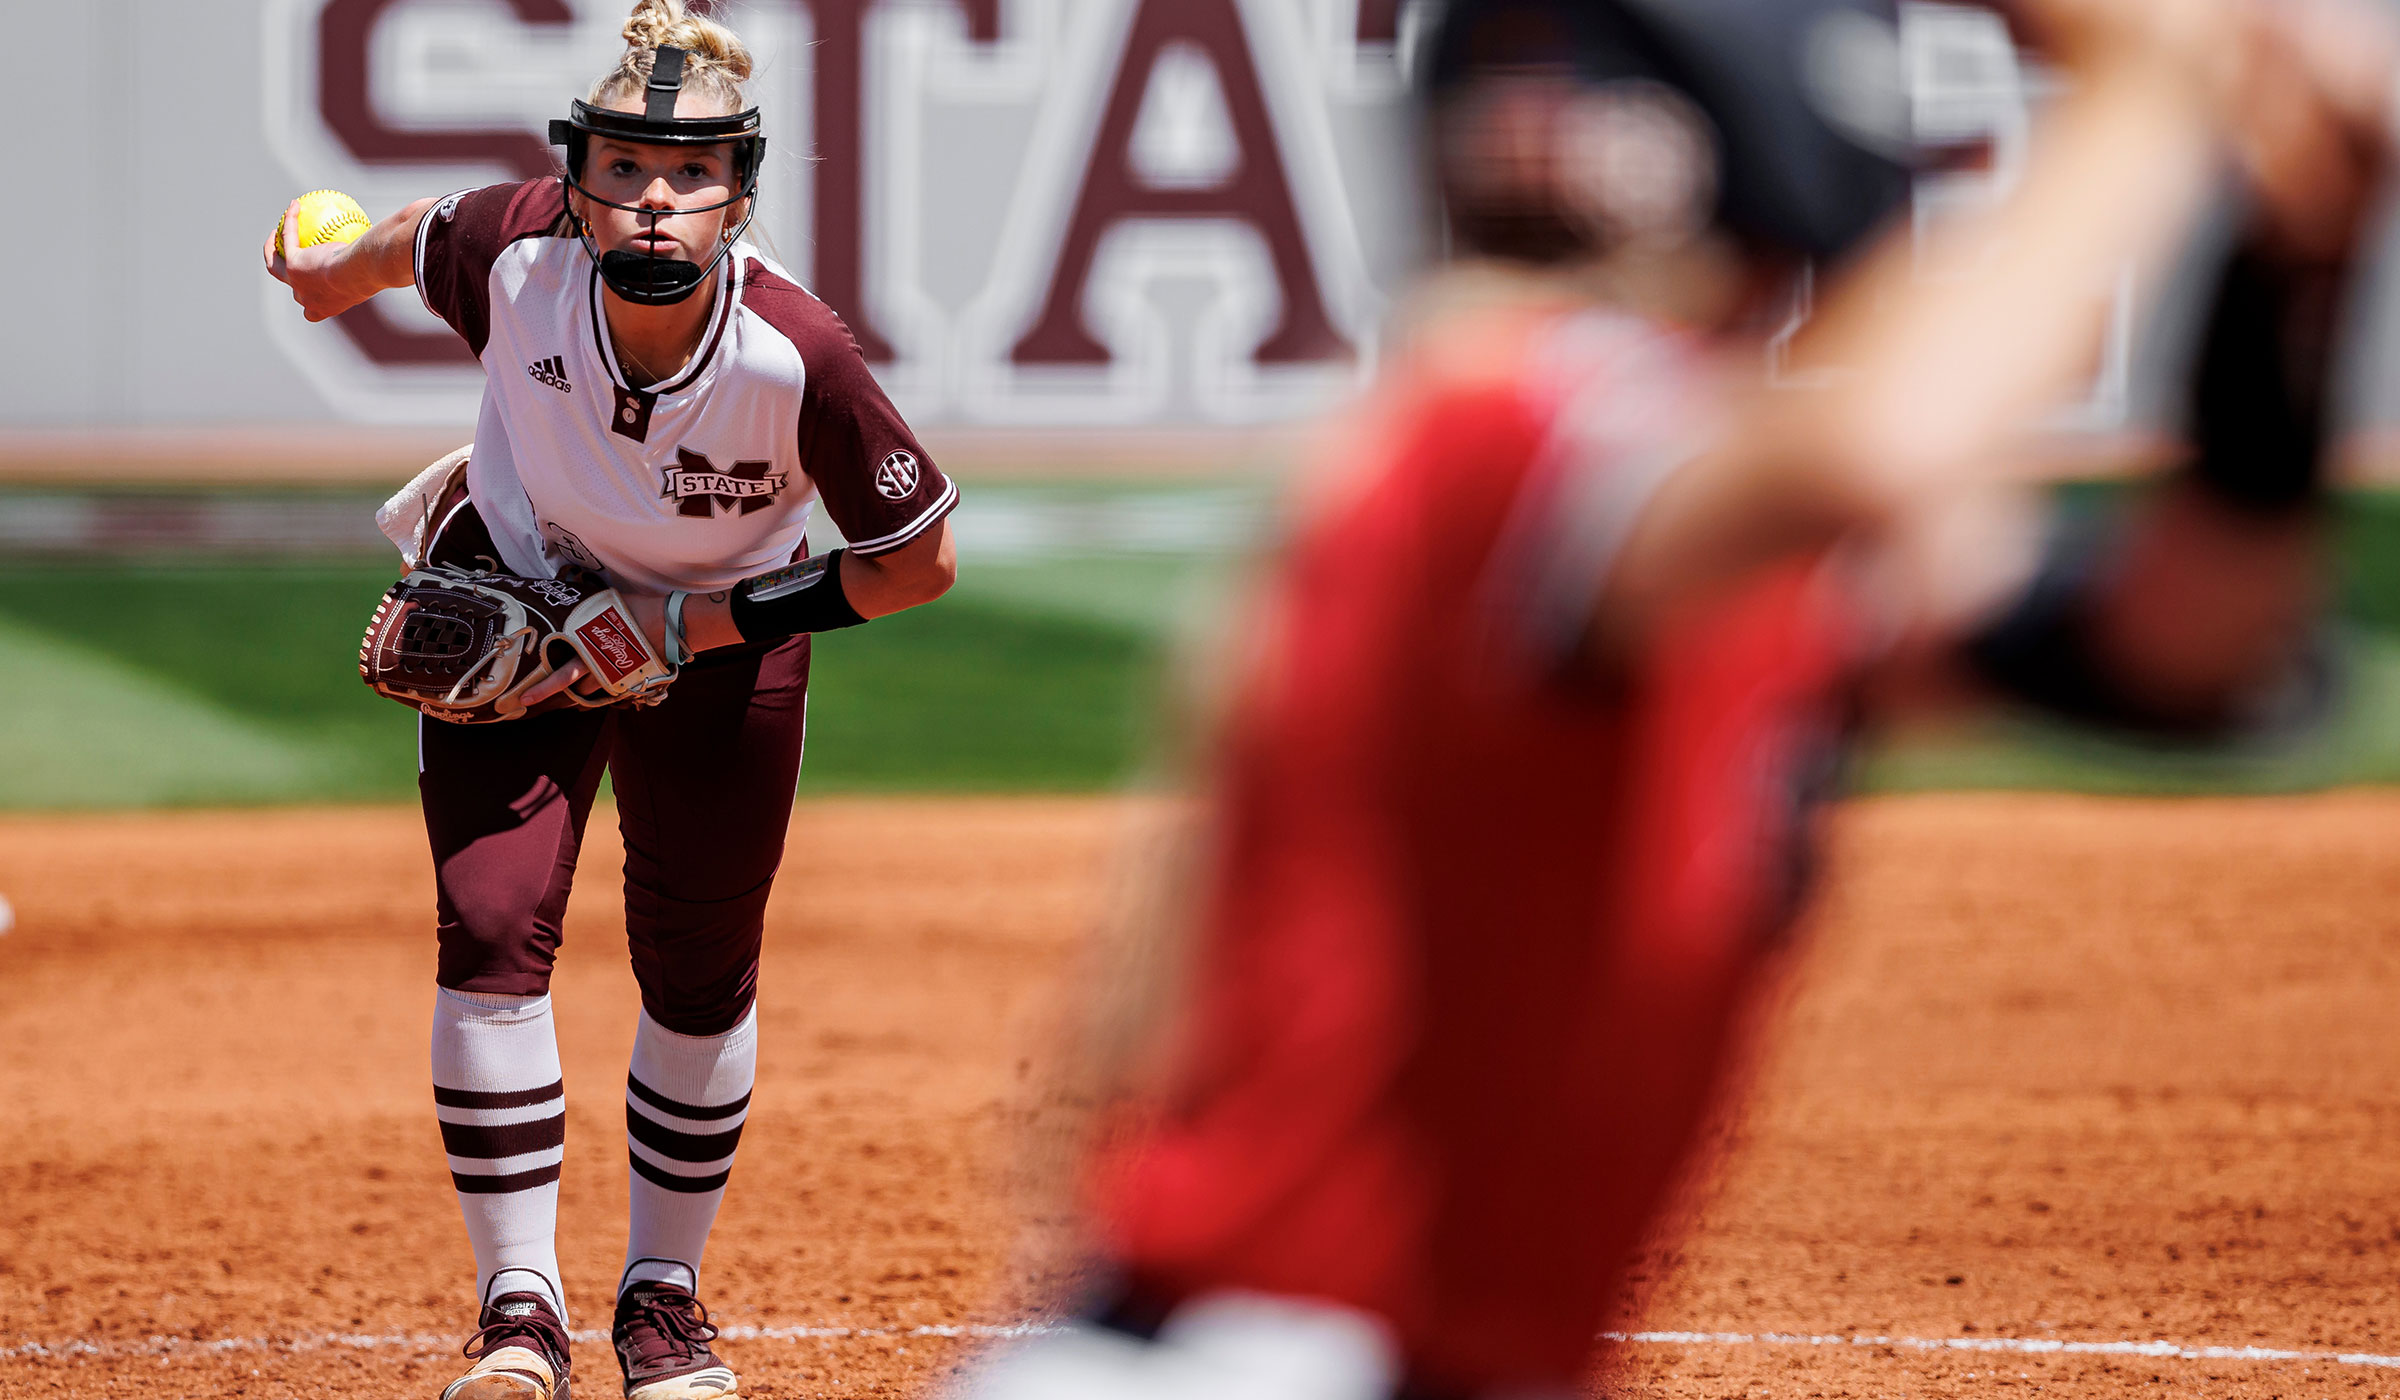 Female in maroon and white uniform winding up to pitch a neon softball to batter at plate wearing red.